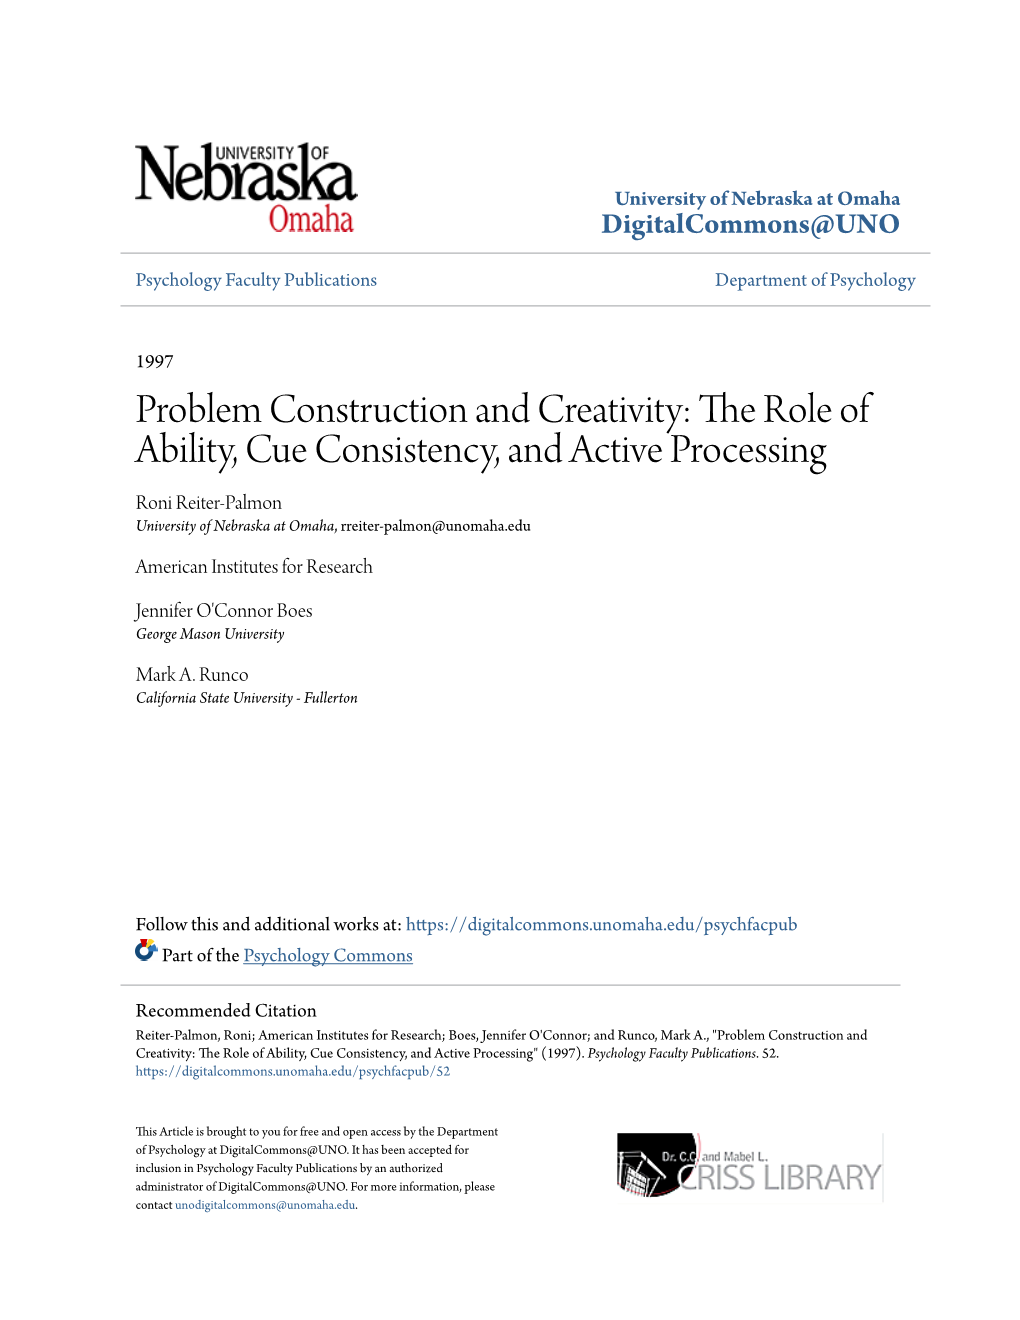 Problem Construction and Creativity: the Role of Ability, Cue